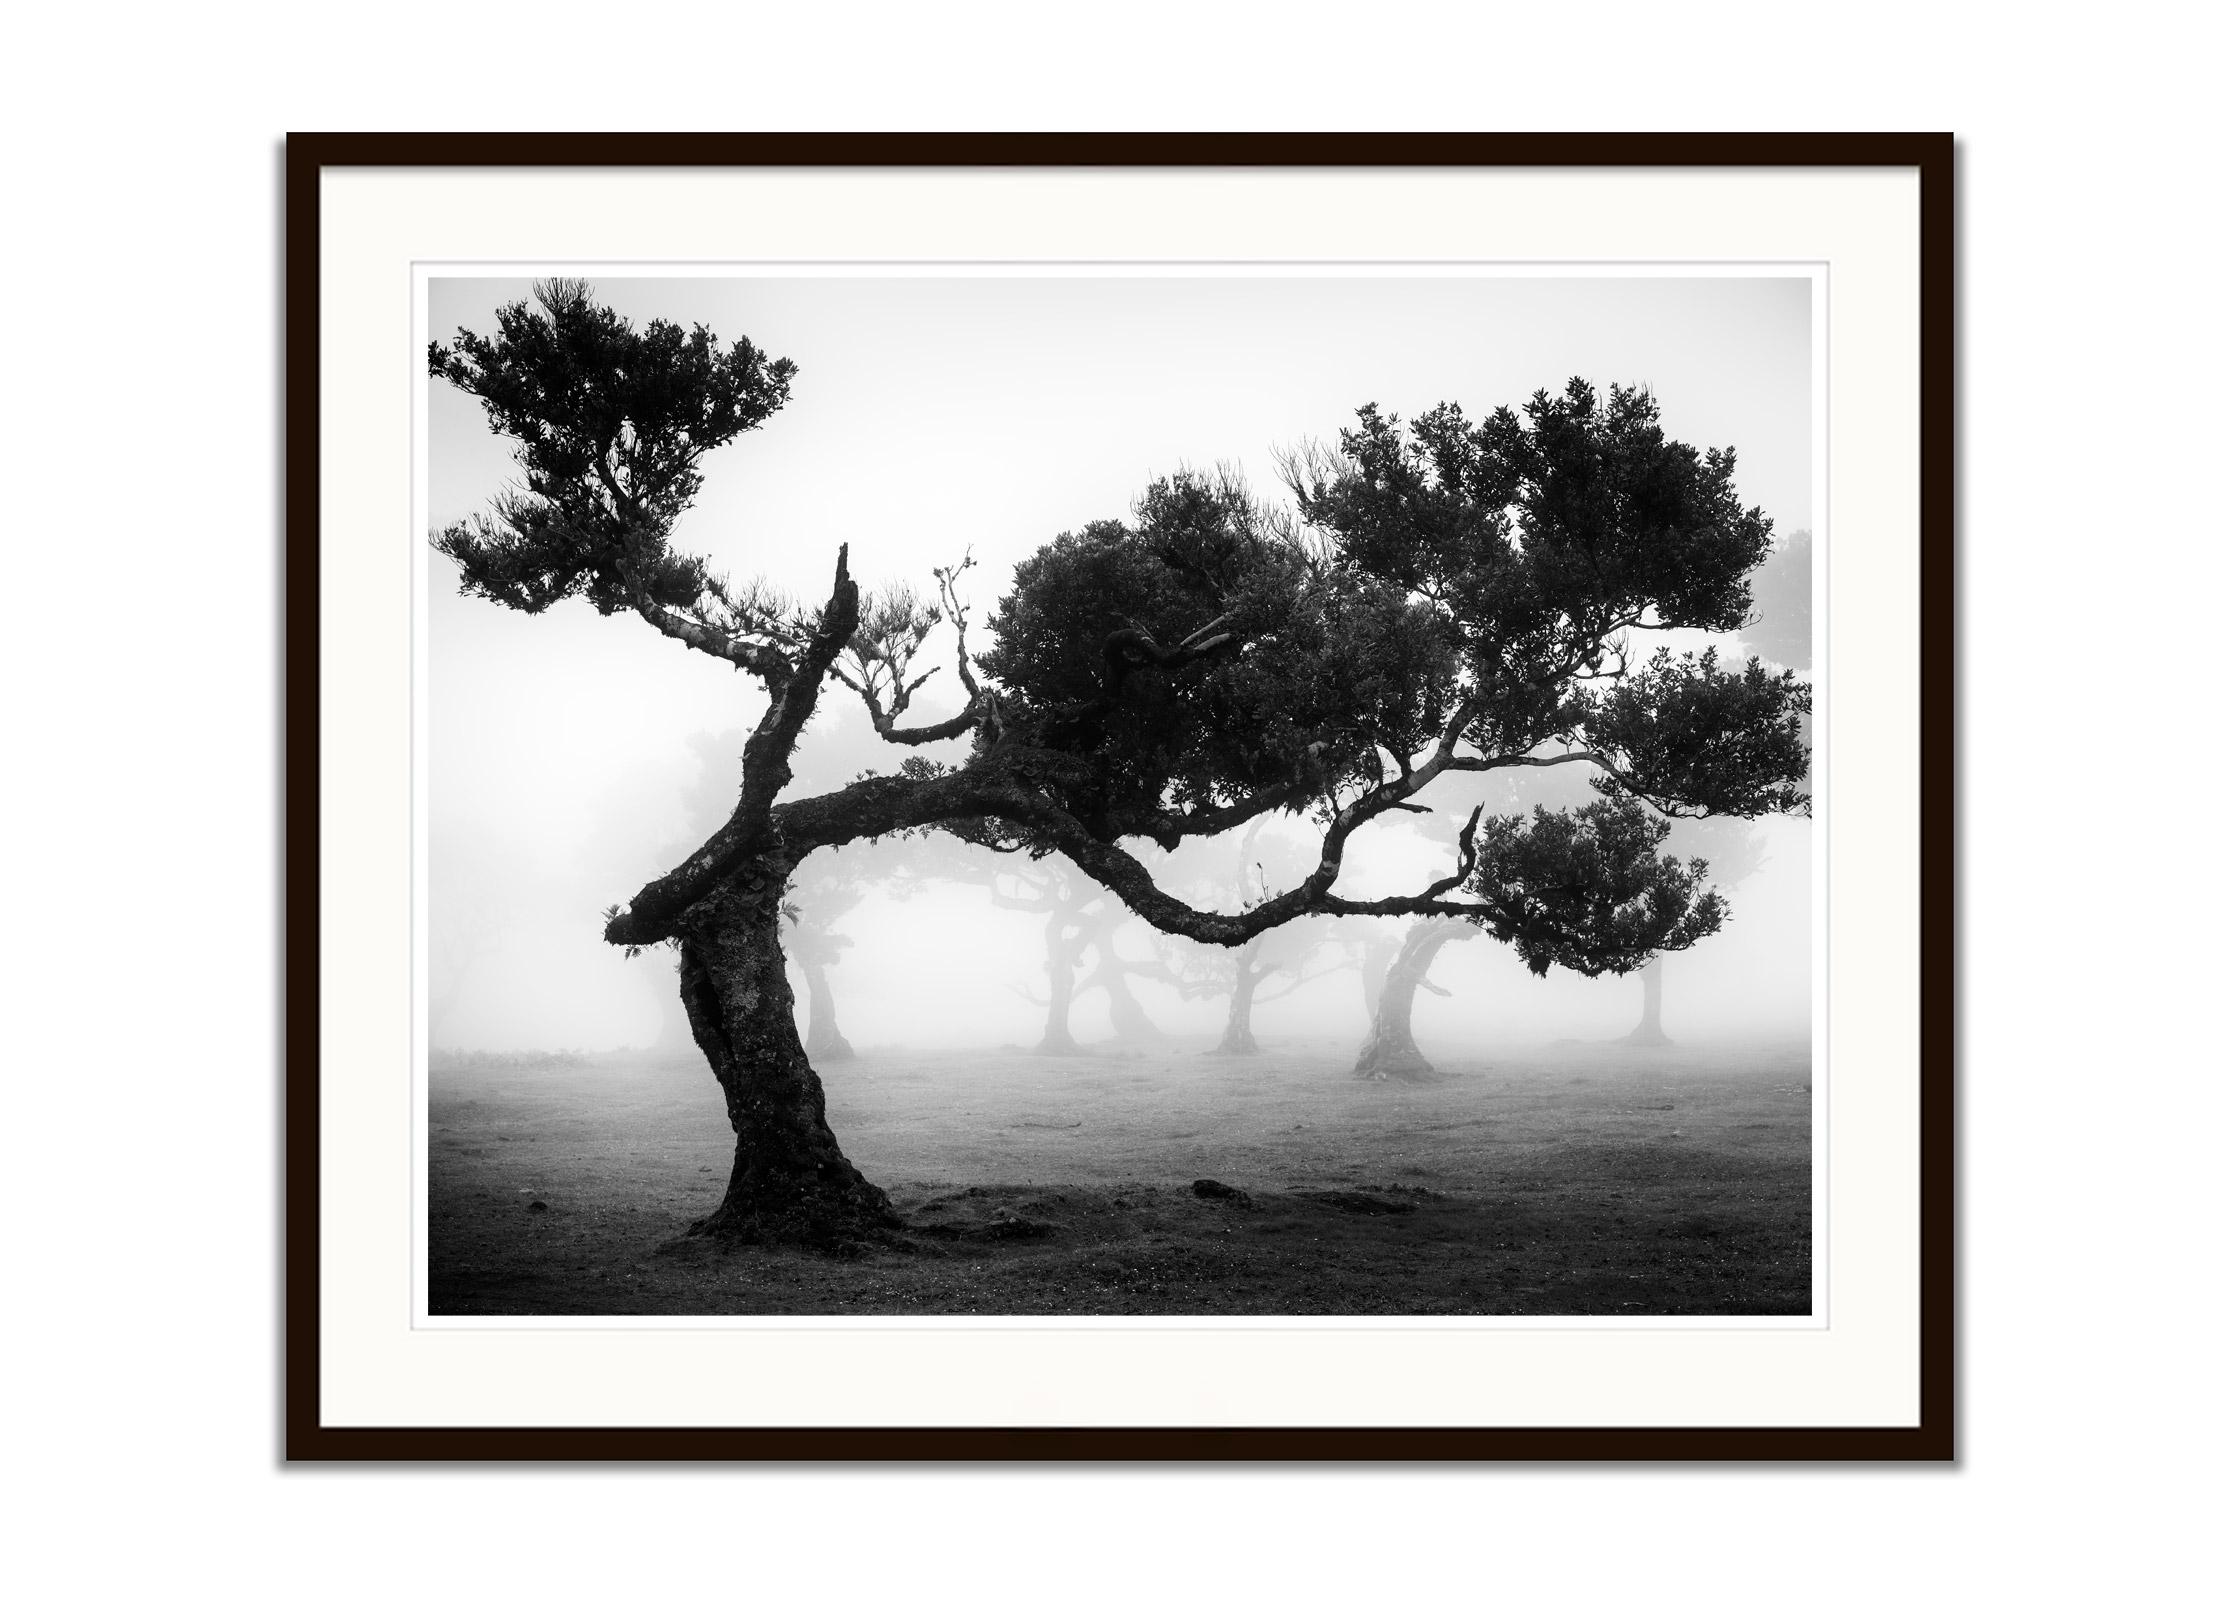 Black and white fine art landscape photography. Crooked tree in fairy forest in foggy mood, Fanal, Portugal. Archival pigment ink print as part of a limited edition of 7. All Gerald Berghammer prints are made to order in limited editions on